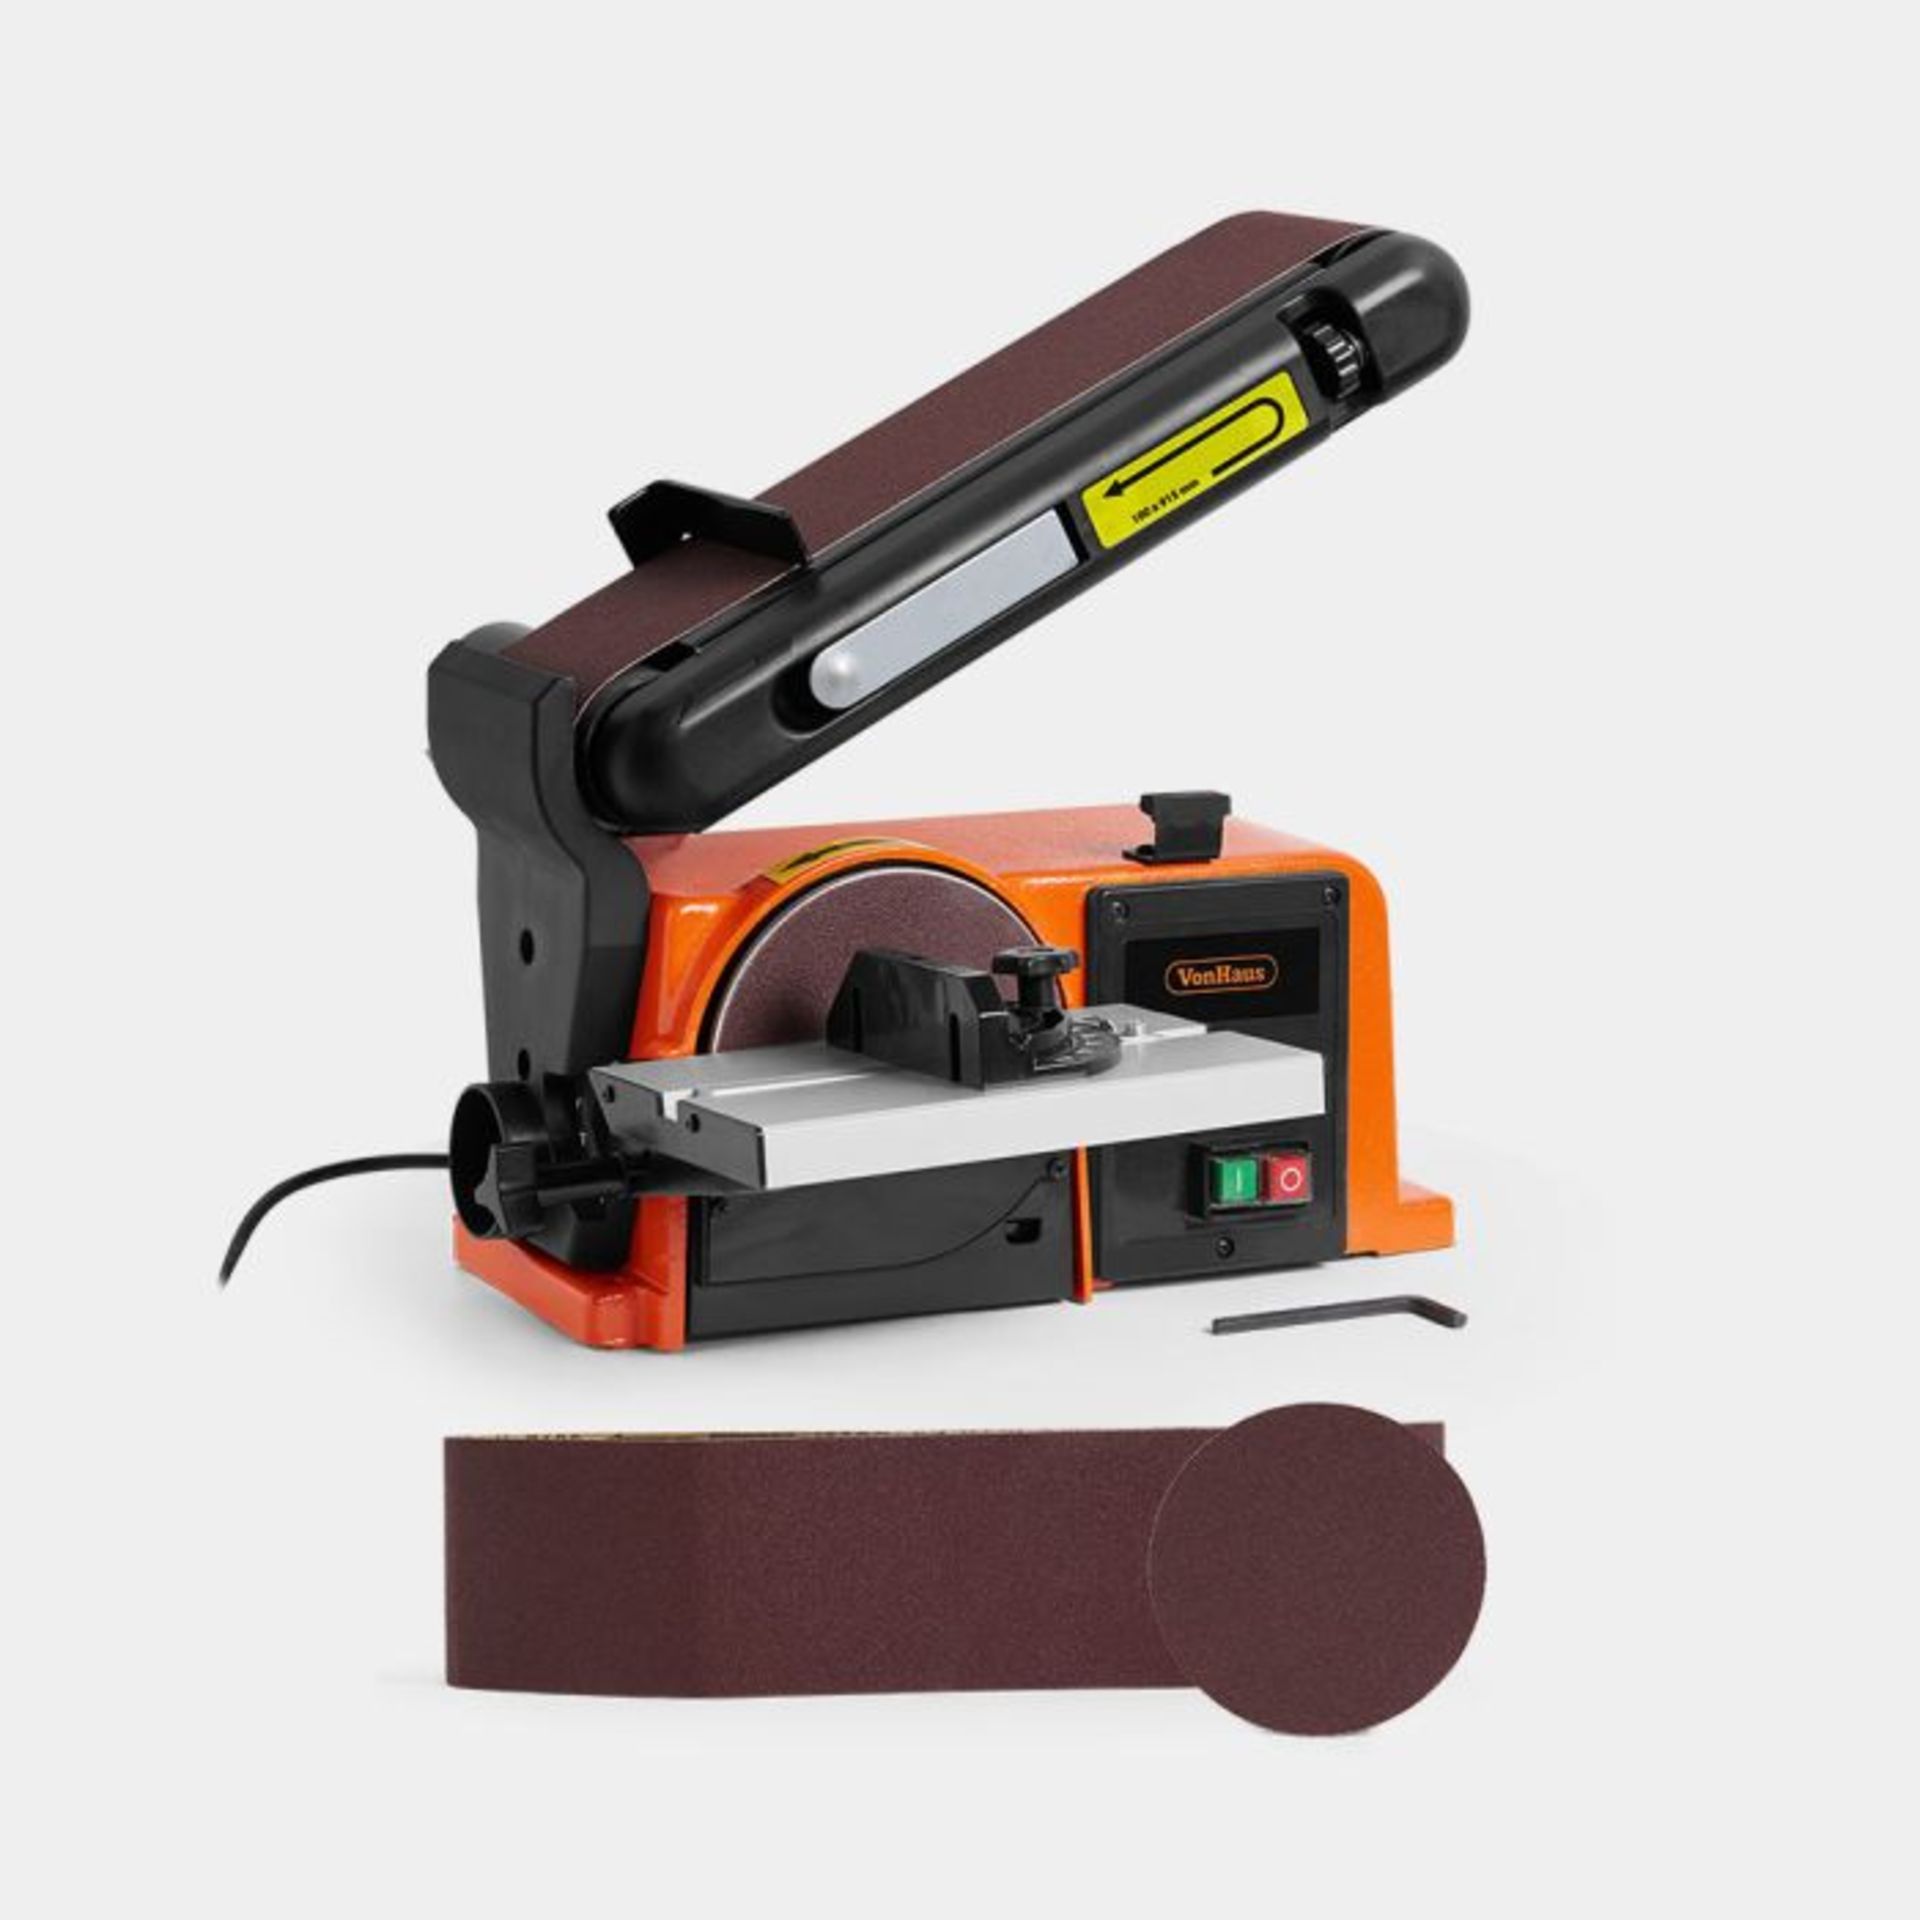 Benchtop Belt and Disc Sander. - ER34. The sanding belt can be used in a vertical or horizontal